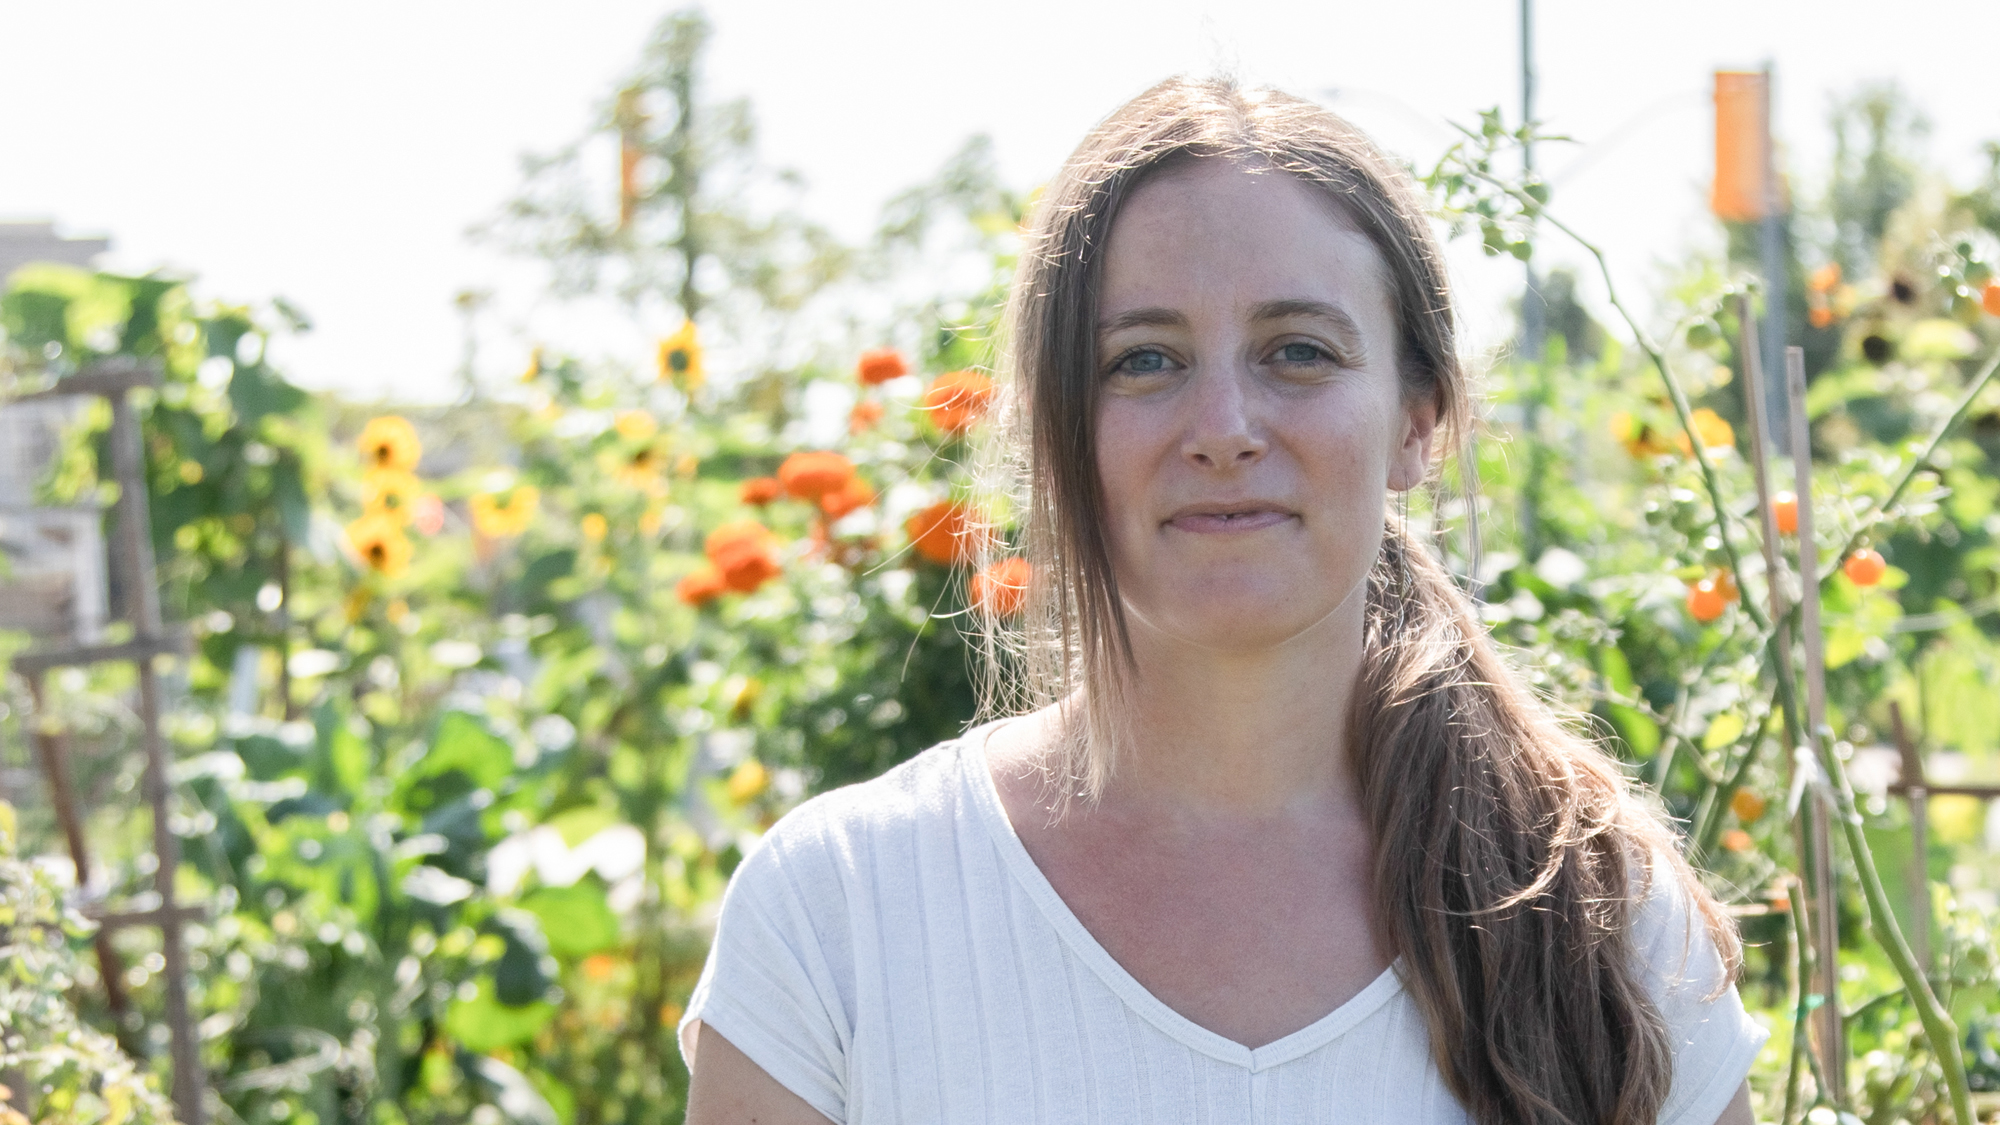 Britt, Executive Director of United Way-funded Ecosource, stands in front of blossoming flowers and tomato vines at one of the agency's community gardens.